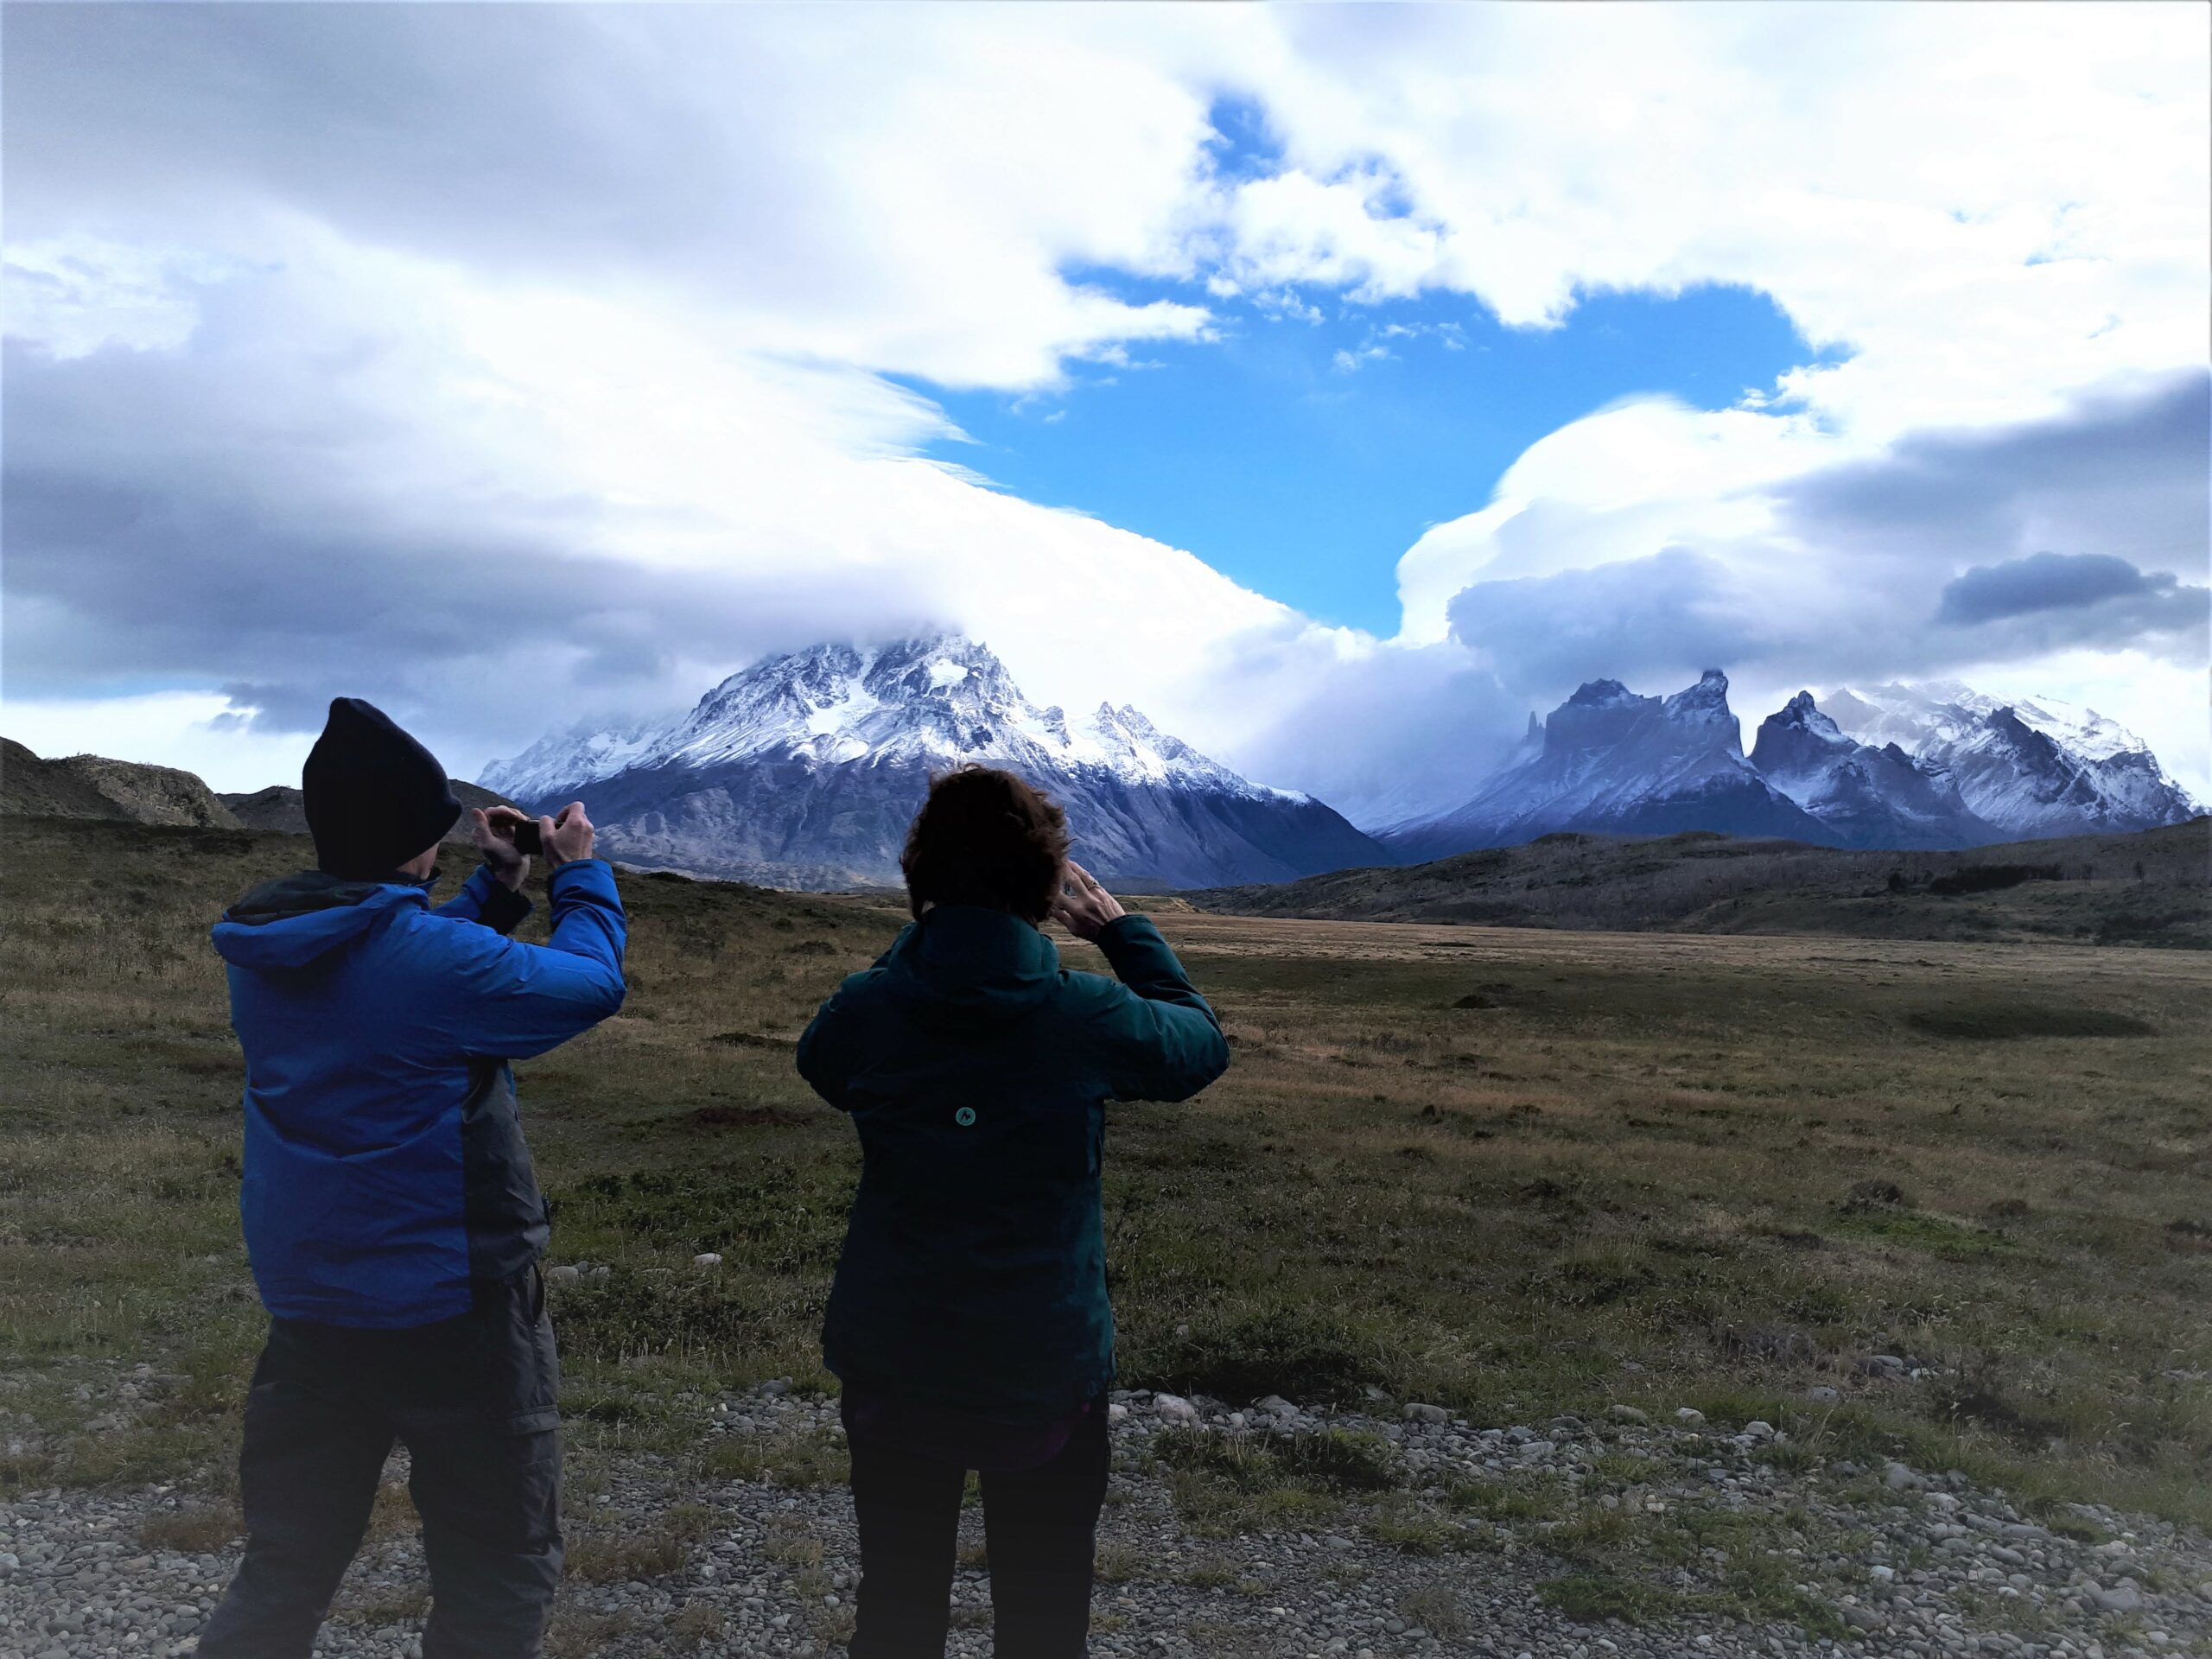 Photographic-tour-around-Torres-del-Paine-National-Park-2-scaled-1.jpg